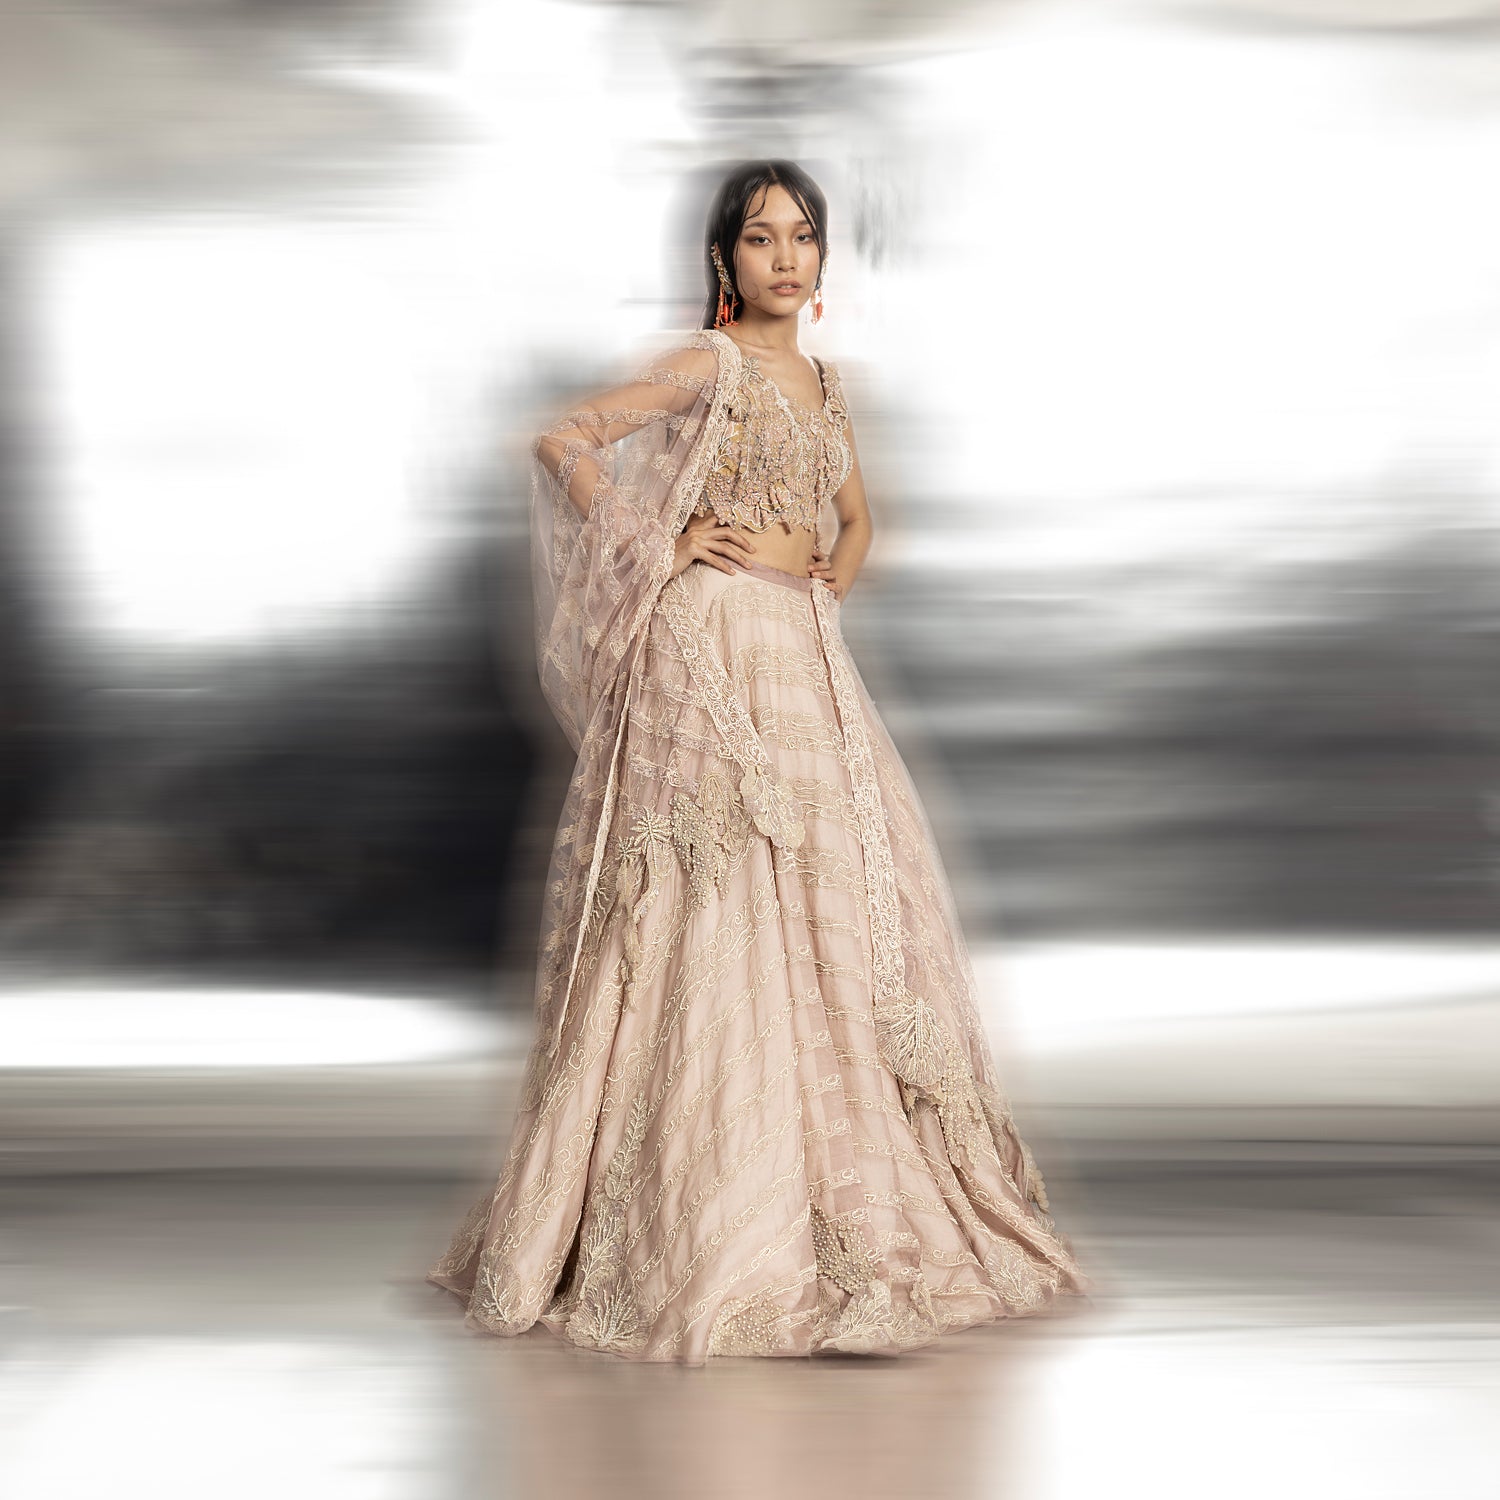 Silk Organza Lehenga with a fine play of geometric lines and reef Motifs with 3D Embroidery detailing on the Blouse. There is a fine play of Resham, Sequin, Pearl, and Katdana detailing. The look has playful young vibes that are perfect for someone who loves new and different visions of design.  #abhisheksharma #fashiondesignerabhisheksharma #reef #redcarpet #shortdress #abhishekstudio #lfw #fdci 